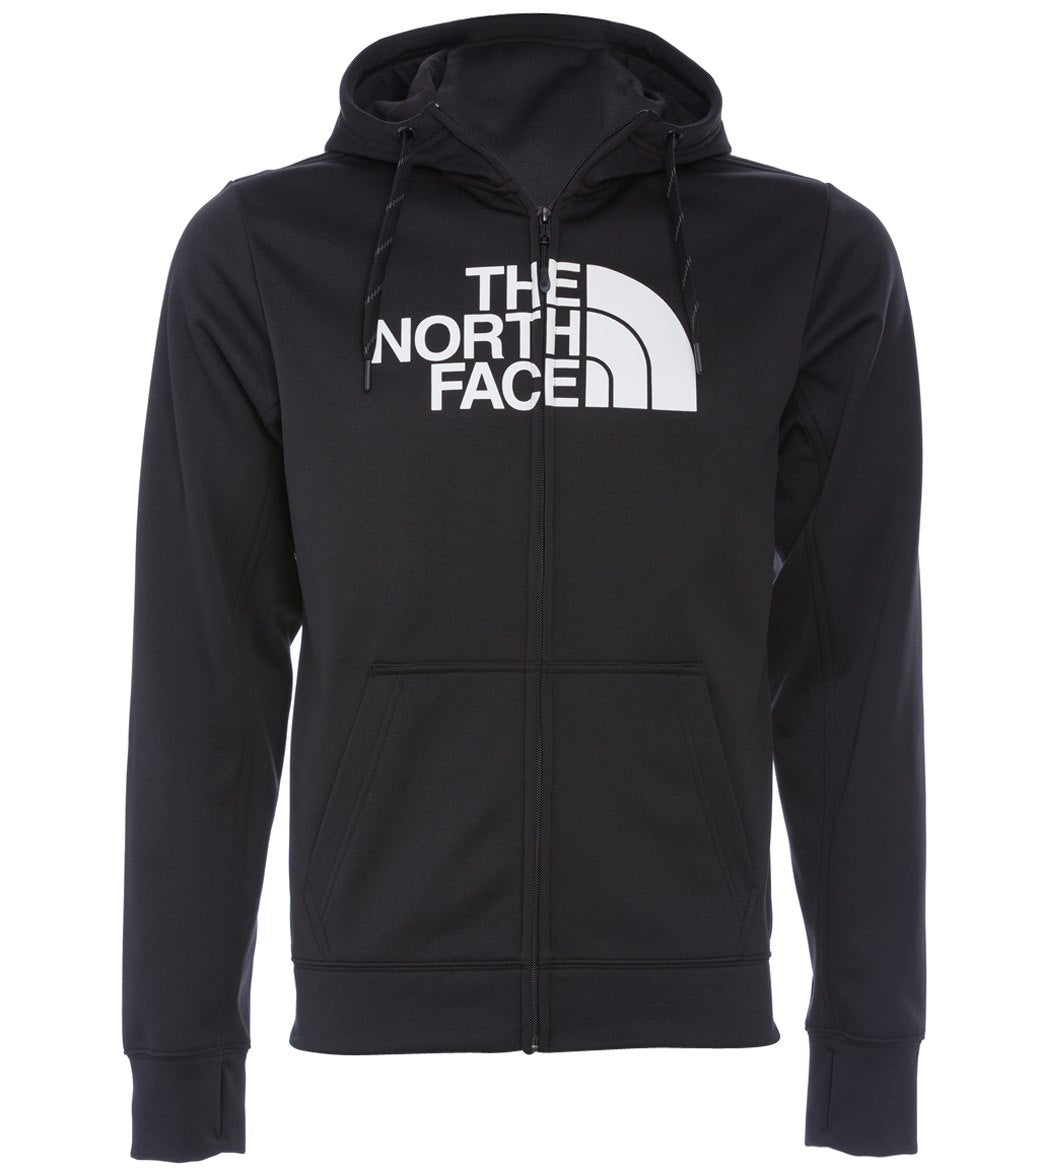 The North Face Men's Surgent Half Dome Full Zip Hoodie at SwimOutlet.com